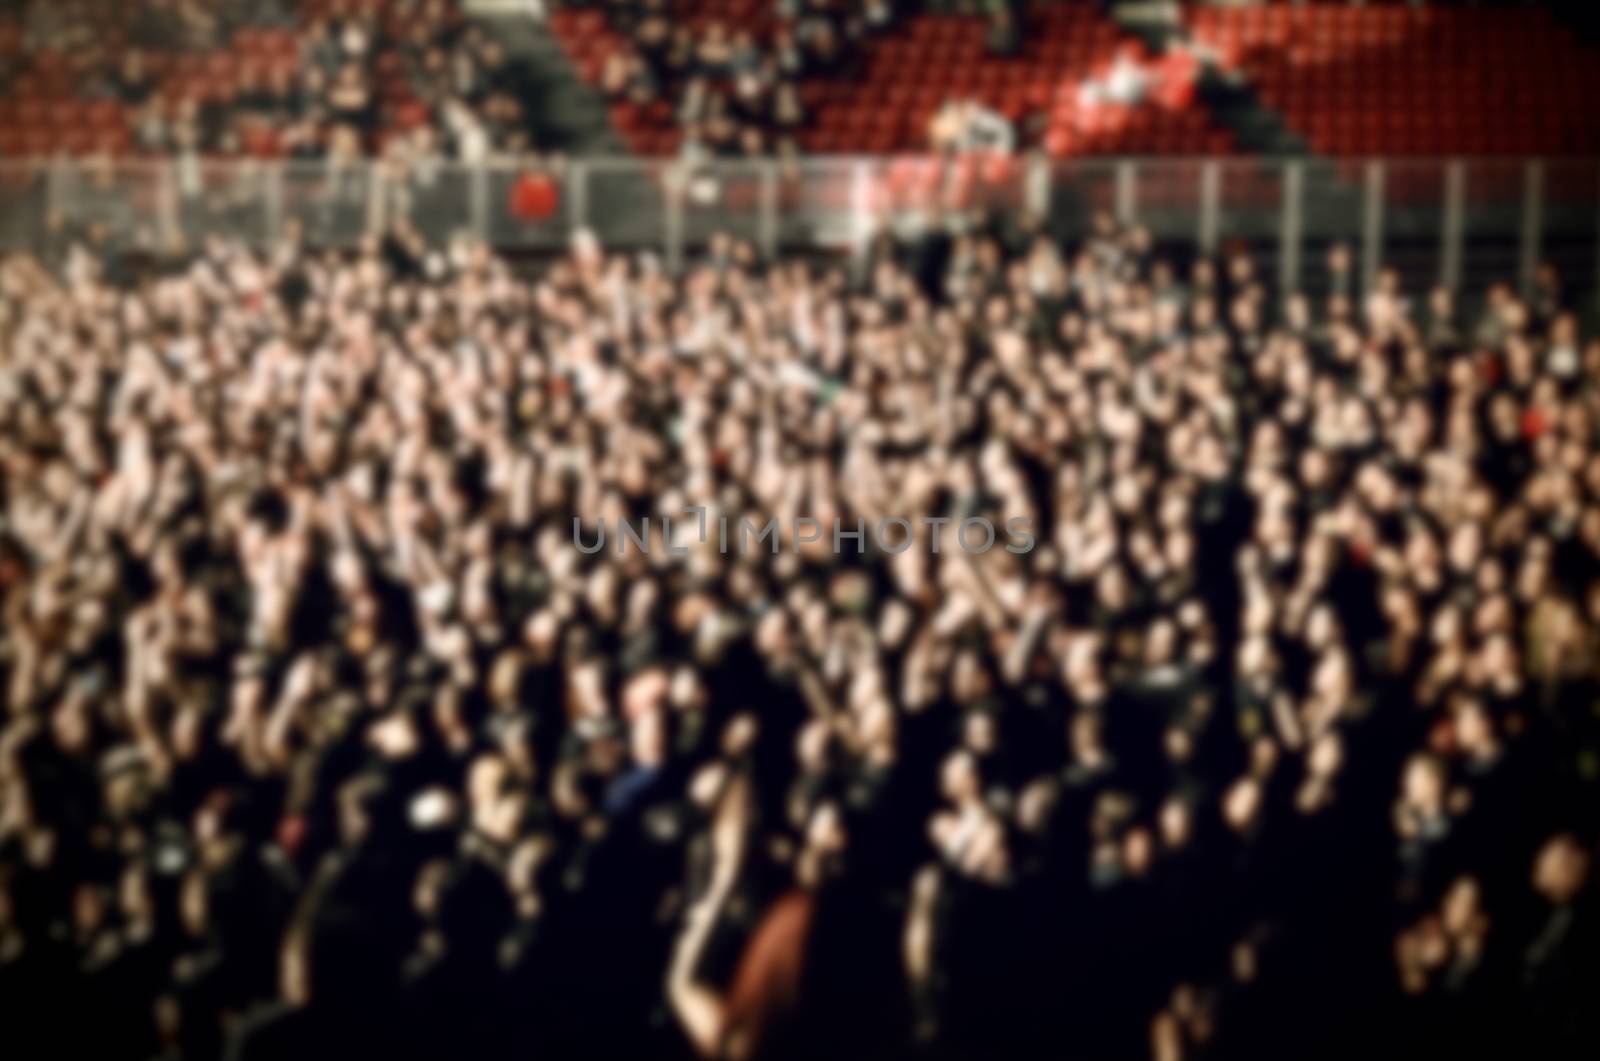 Concert crowd shouting blurred background  by F1b0nacci